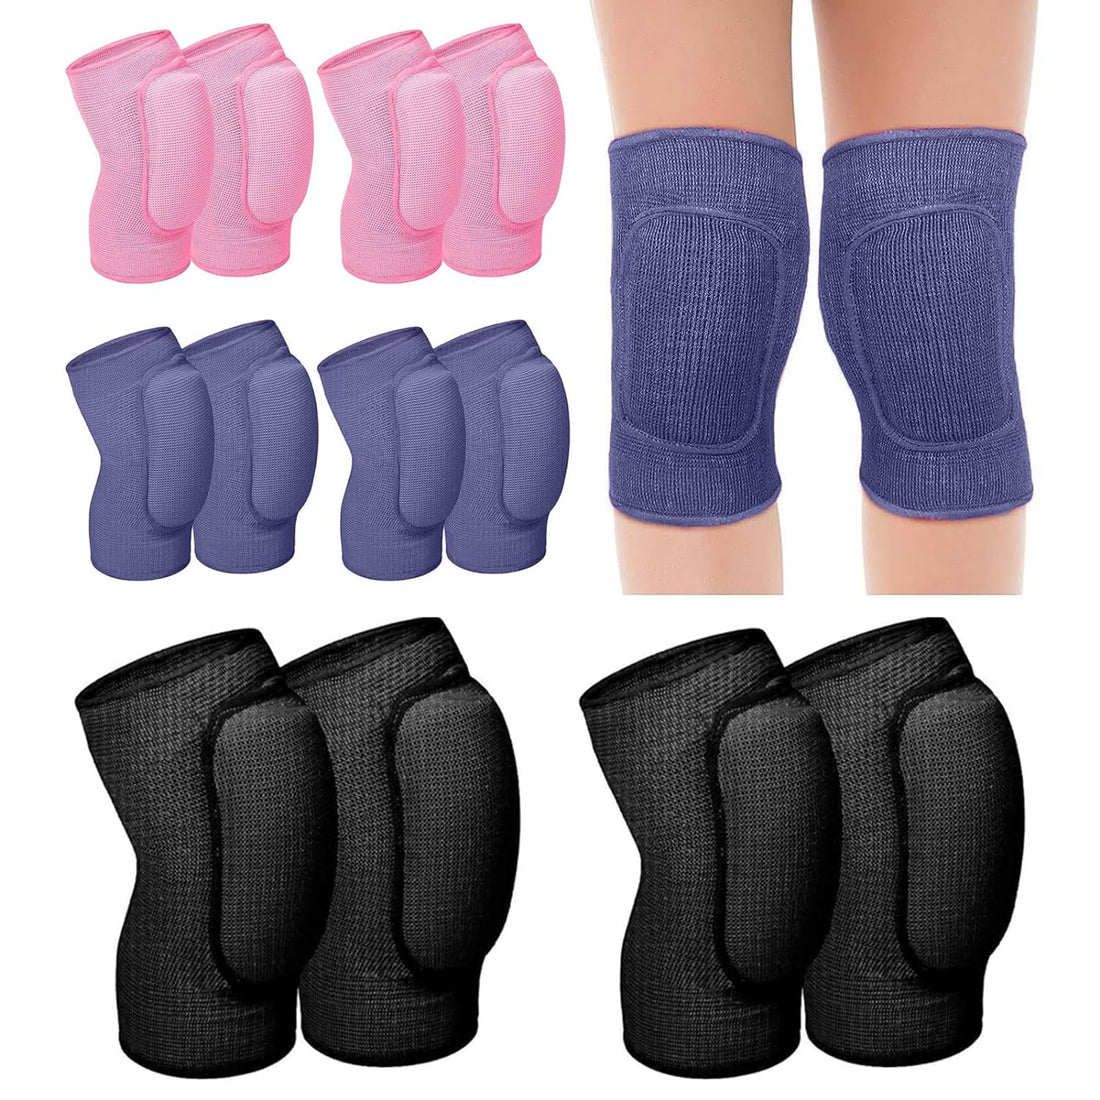 AFBORD 6 Pairs Volleyball Knee Pads, Soft Breathable Knee Brace, Non-slip Padded Knee Supports for Volleyball Football Soccer Dance Wrestling Running Cycling (One Size, Black,Blue, Pink,)